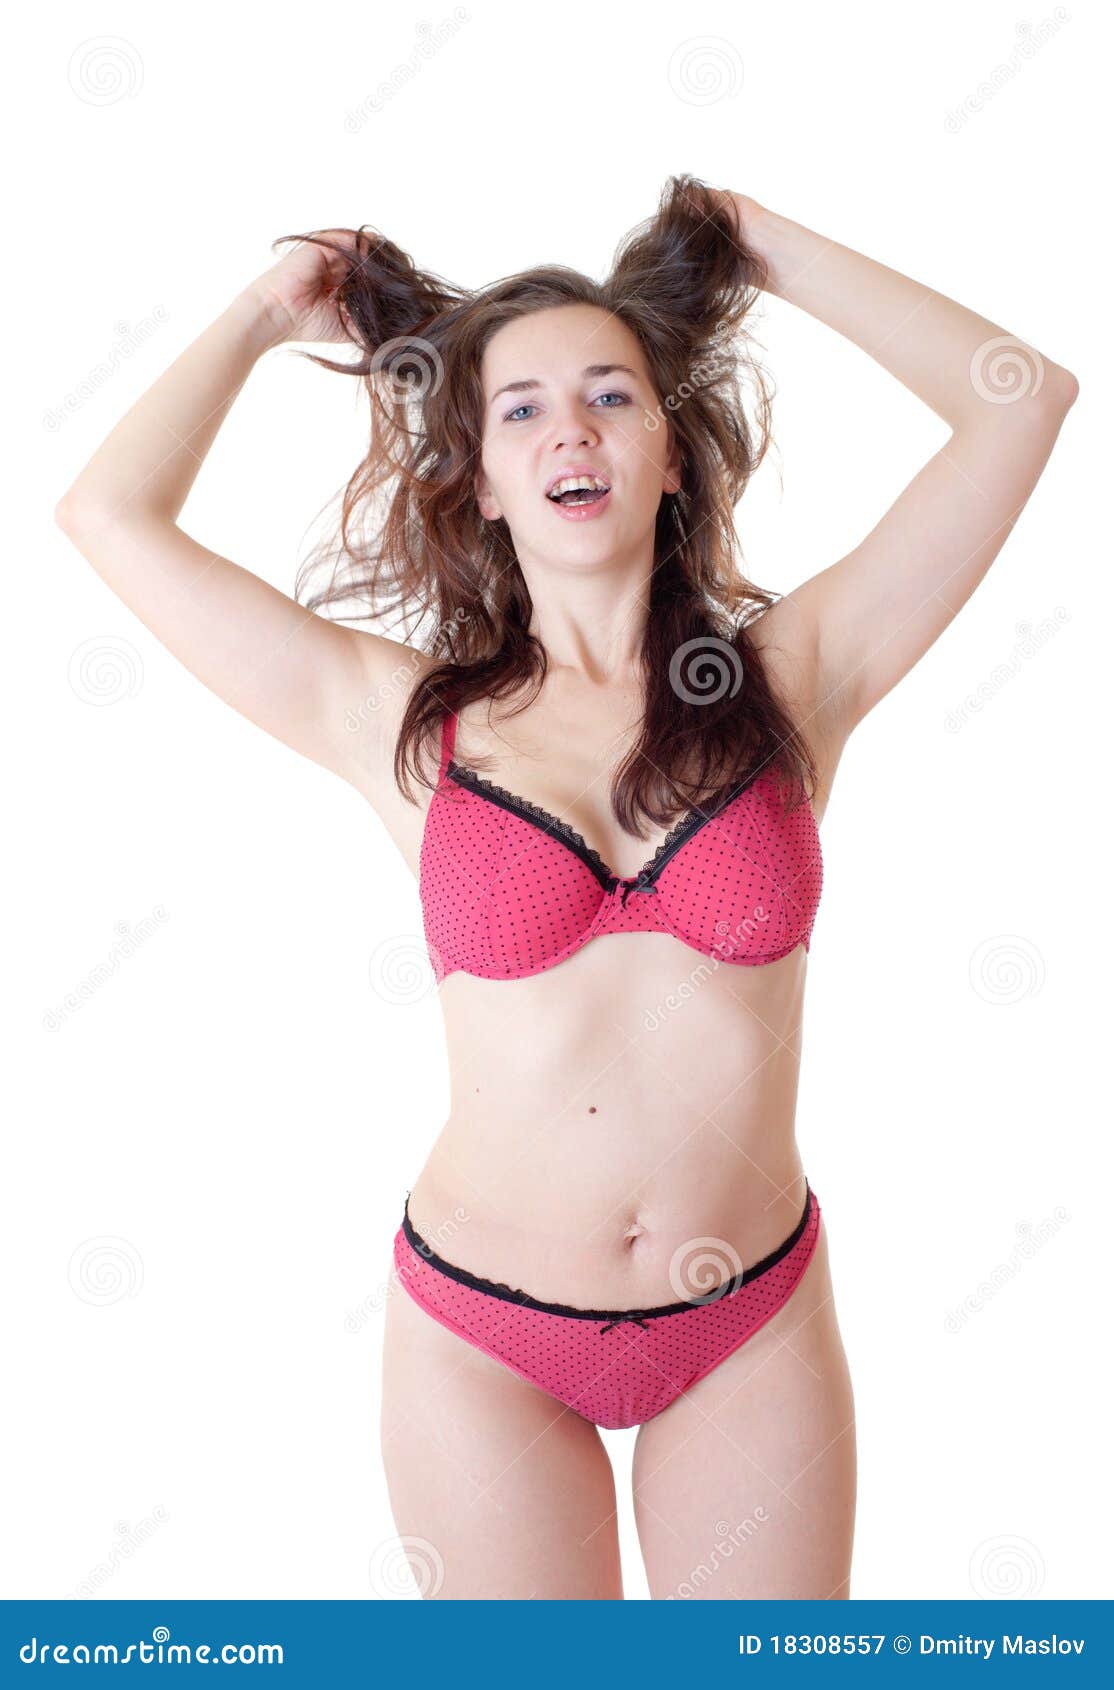 Girl In Red Underwear. Stock Photo, Picture and Royalty Free Image. Image  62494561.